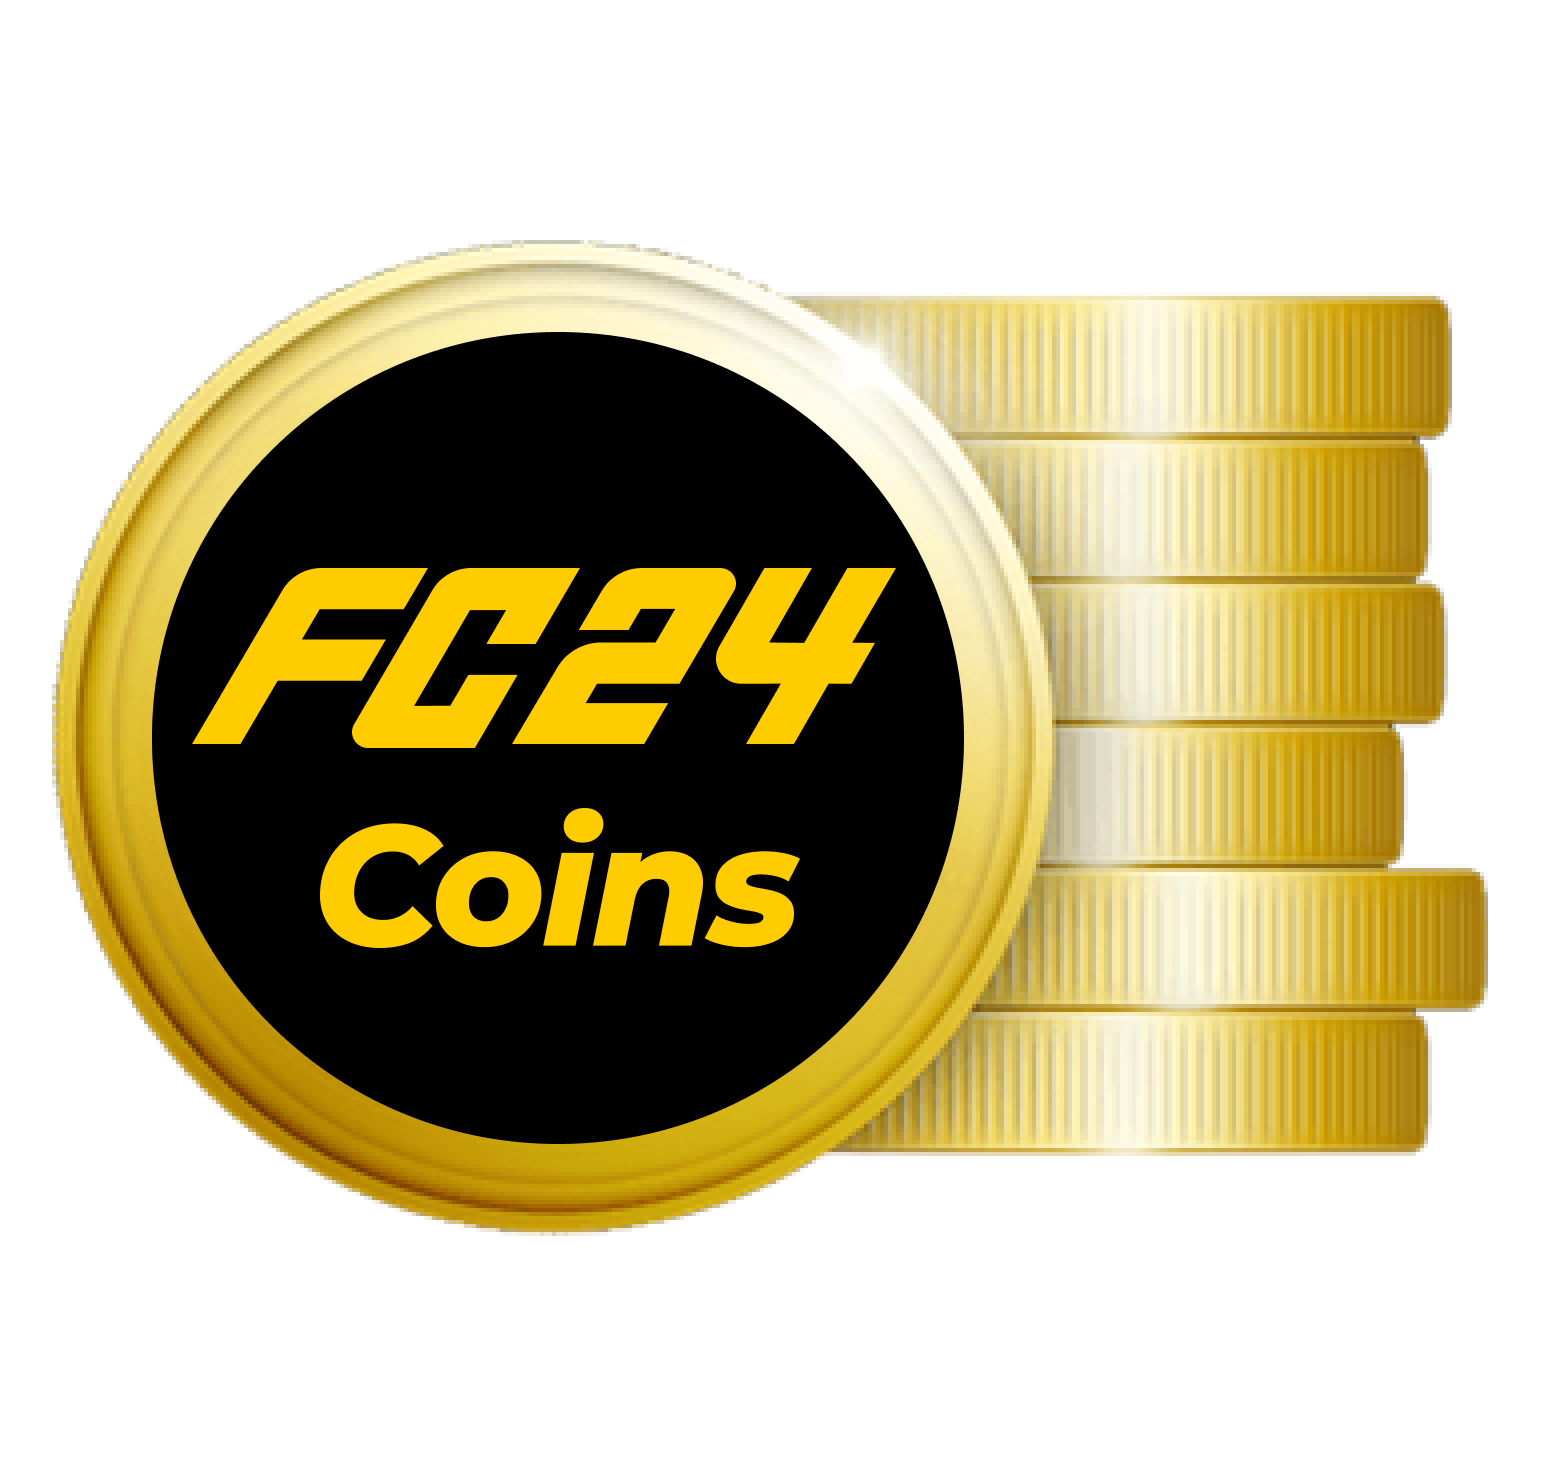 Buy EA Sports FC 24 Coins, FC 24 Coins For Sale - IGGM